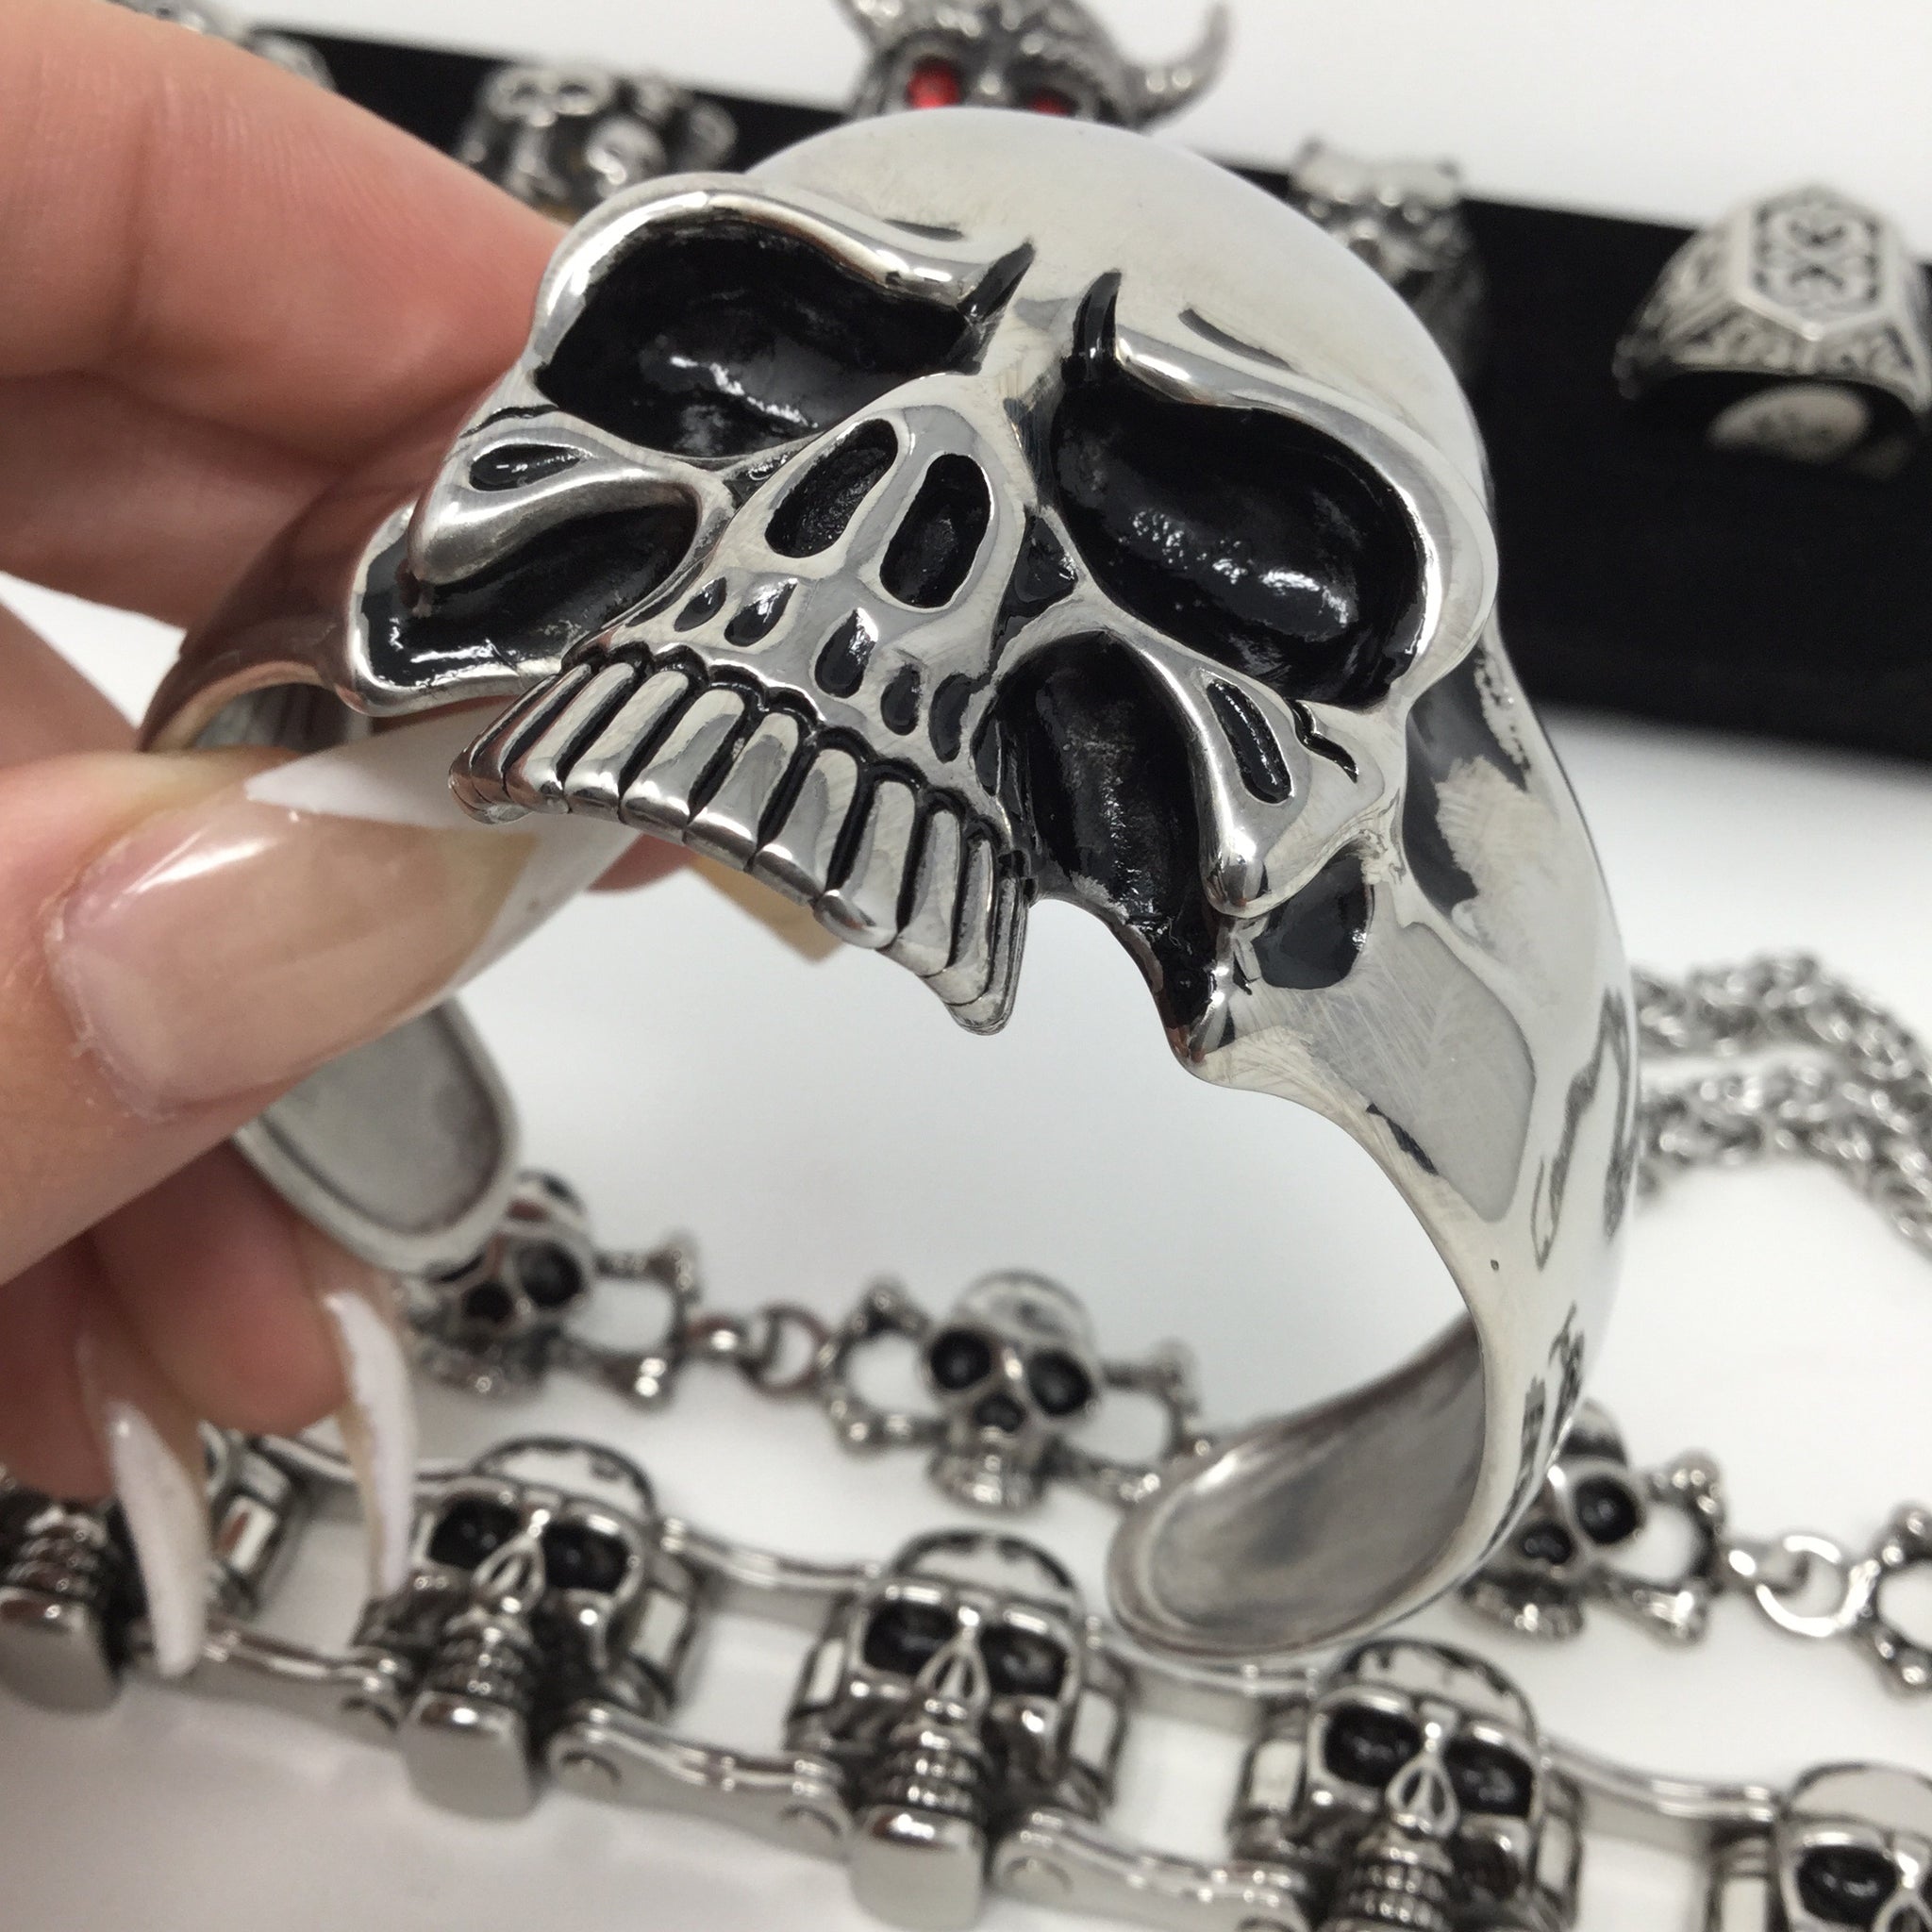 Large Stainless Steel Skull Skeleton Bracelet for Men, Gothic Punk Style  with Old Used Metal Treatment, Perfect for Edgy Casual Wear or Themed  Events – COOLSTEELANDBEYOND Jewelry